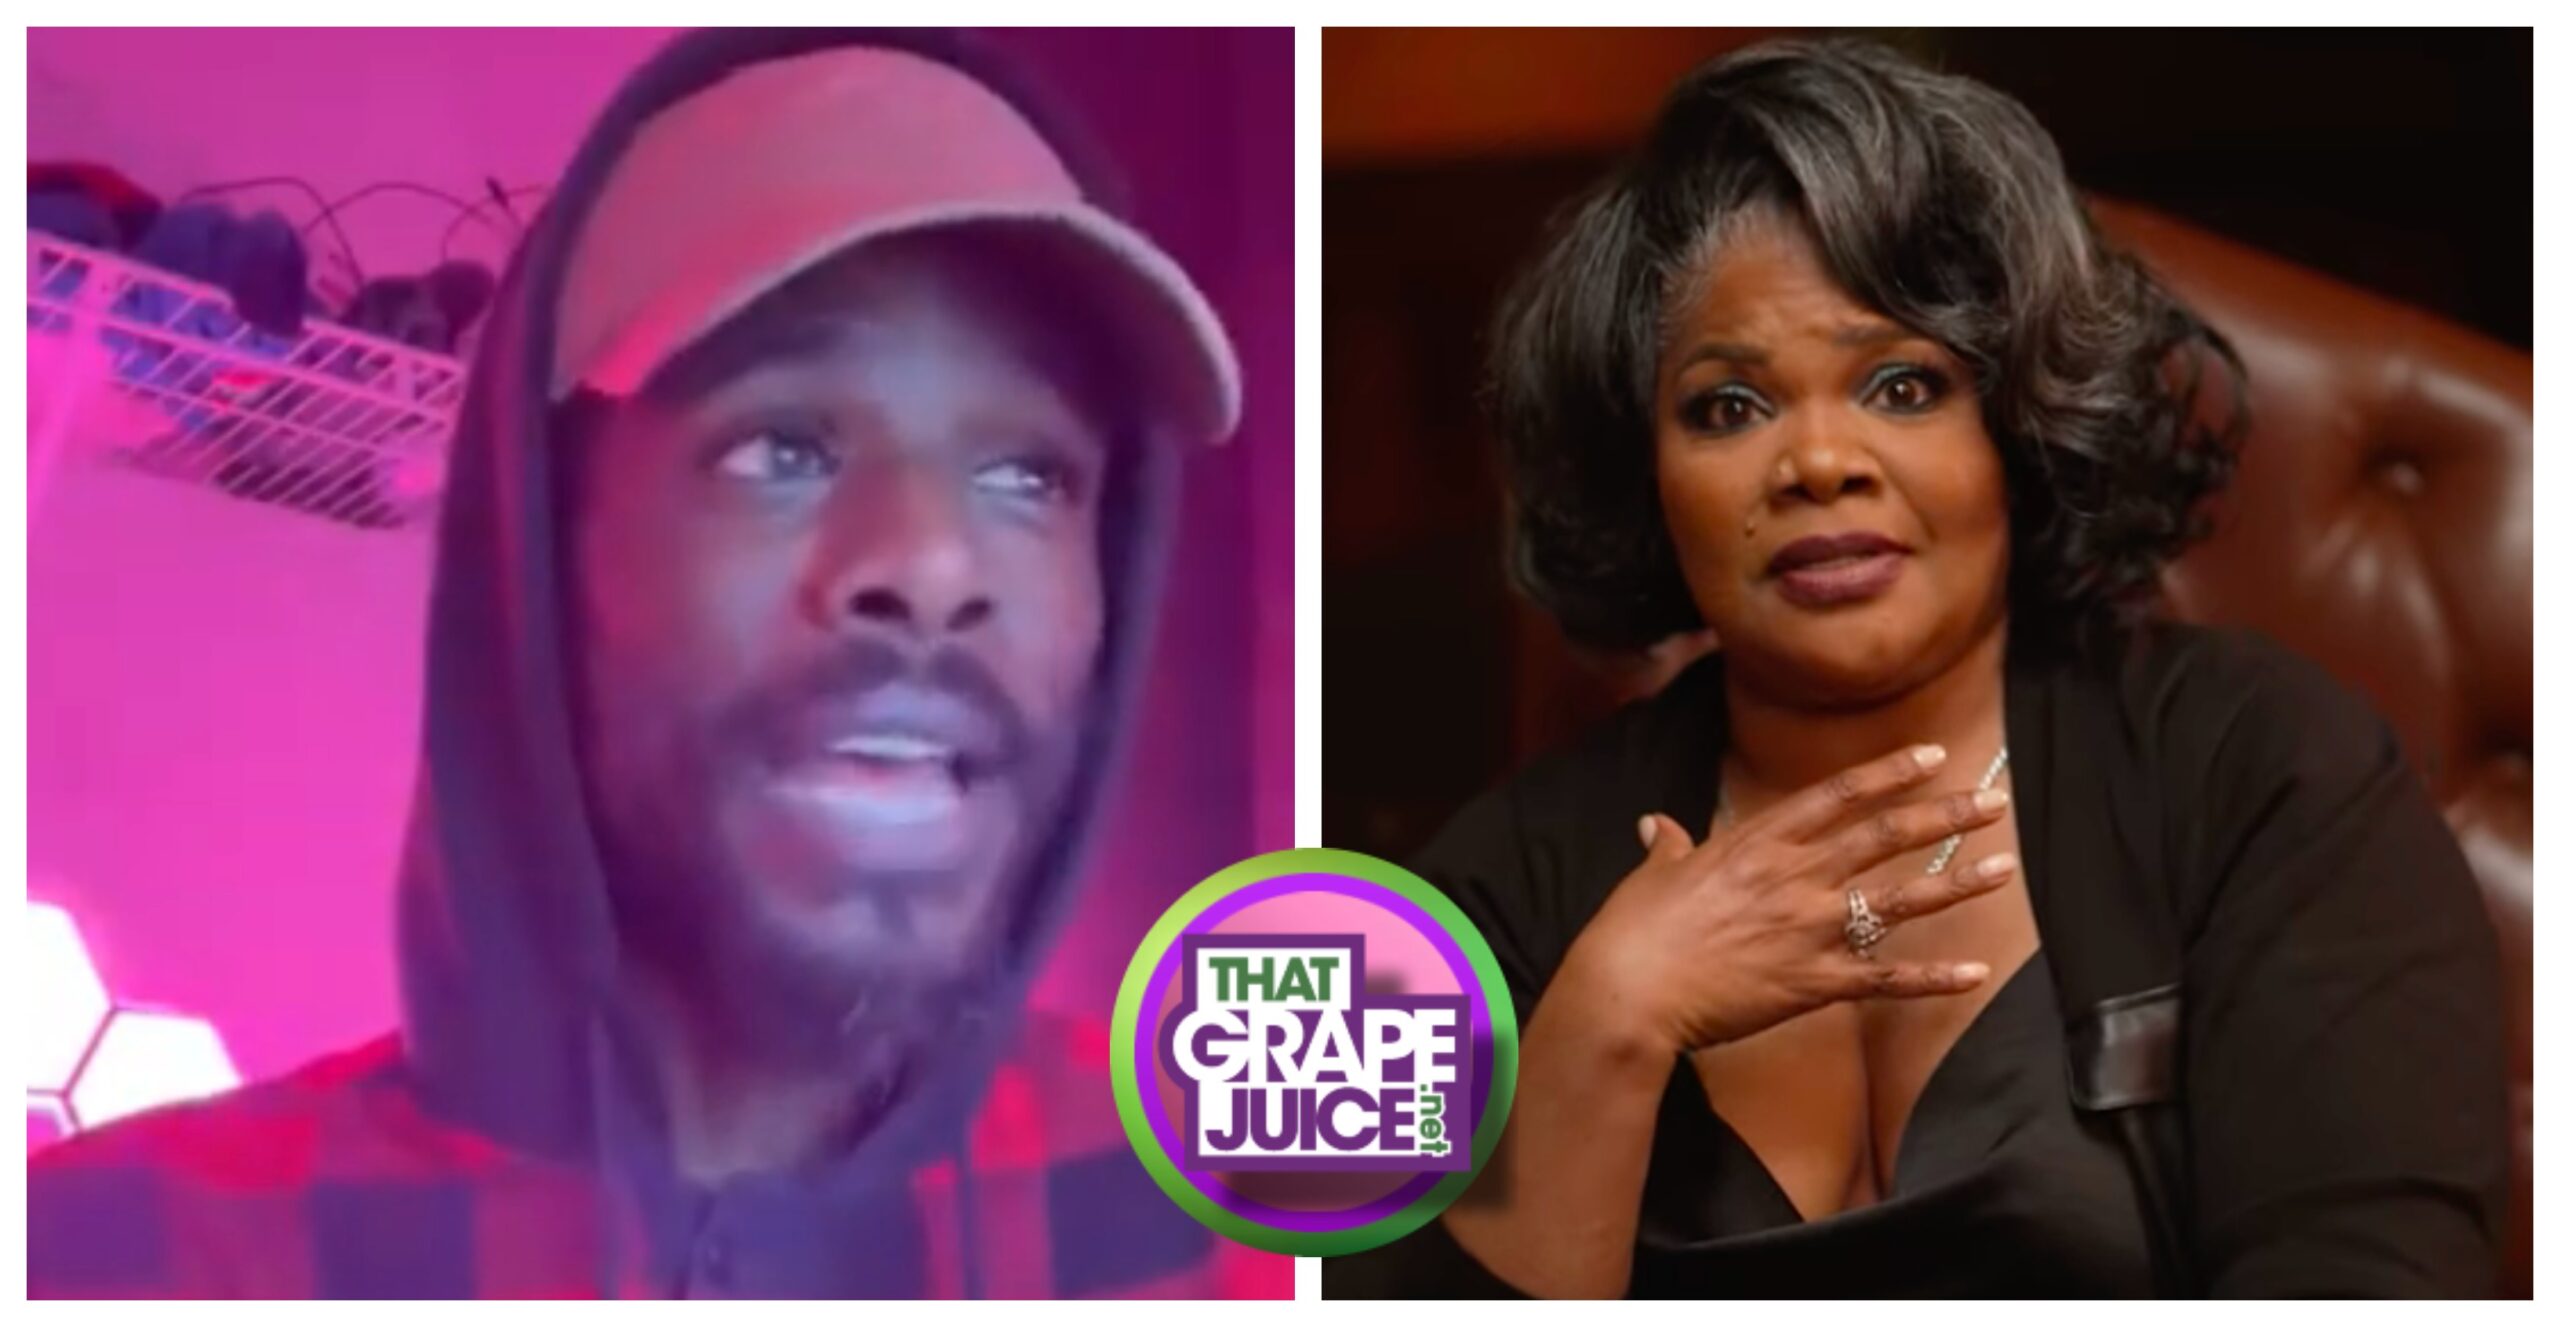 Mo’Nique’s Estranged Son SLAMS the “Self-Centered” Star, Claims Her Assistant Was “More of a Mother” to Him